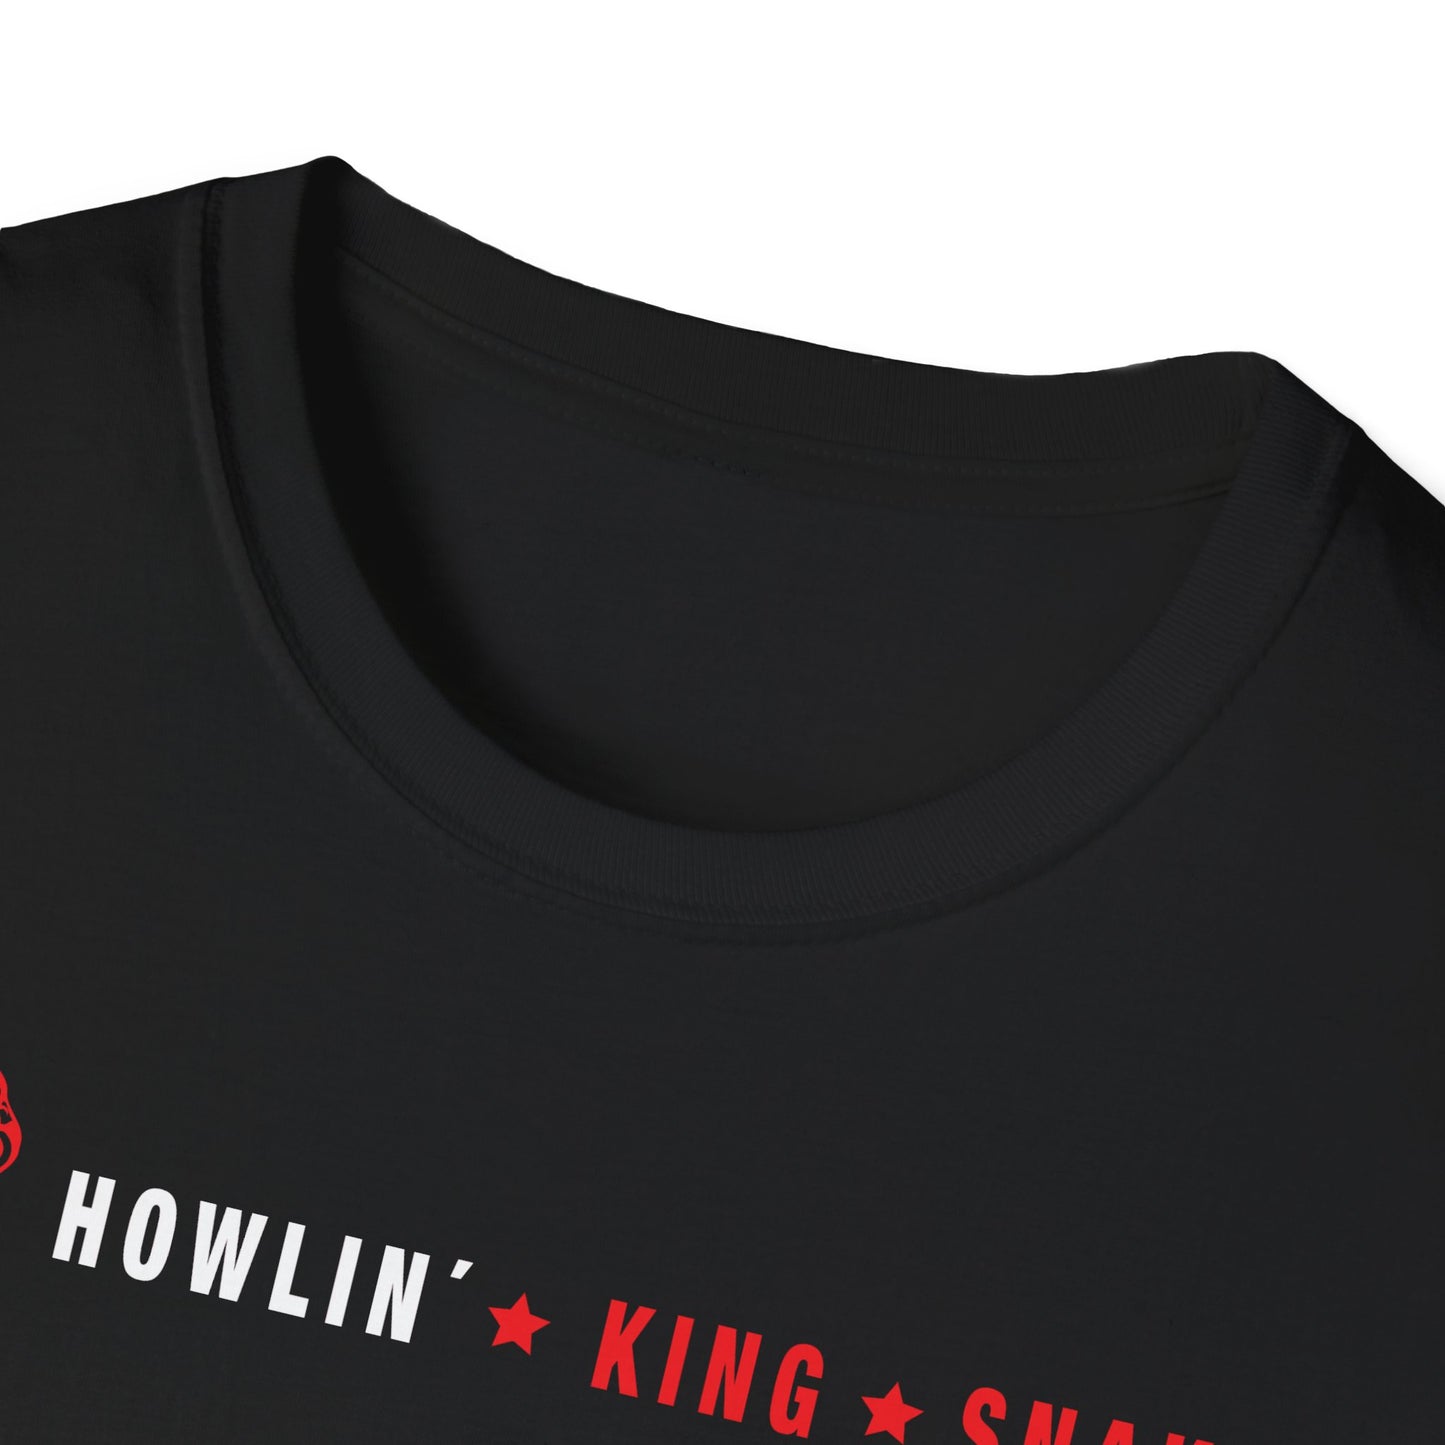 The Howling King Snake - Unisex Softstyle T-Shirt